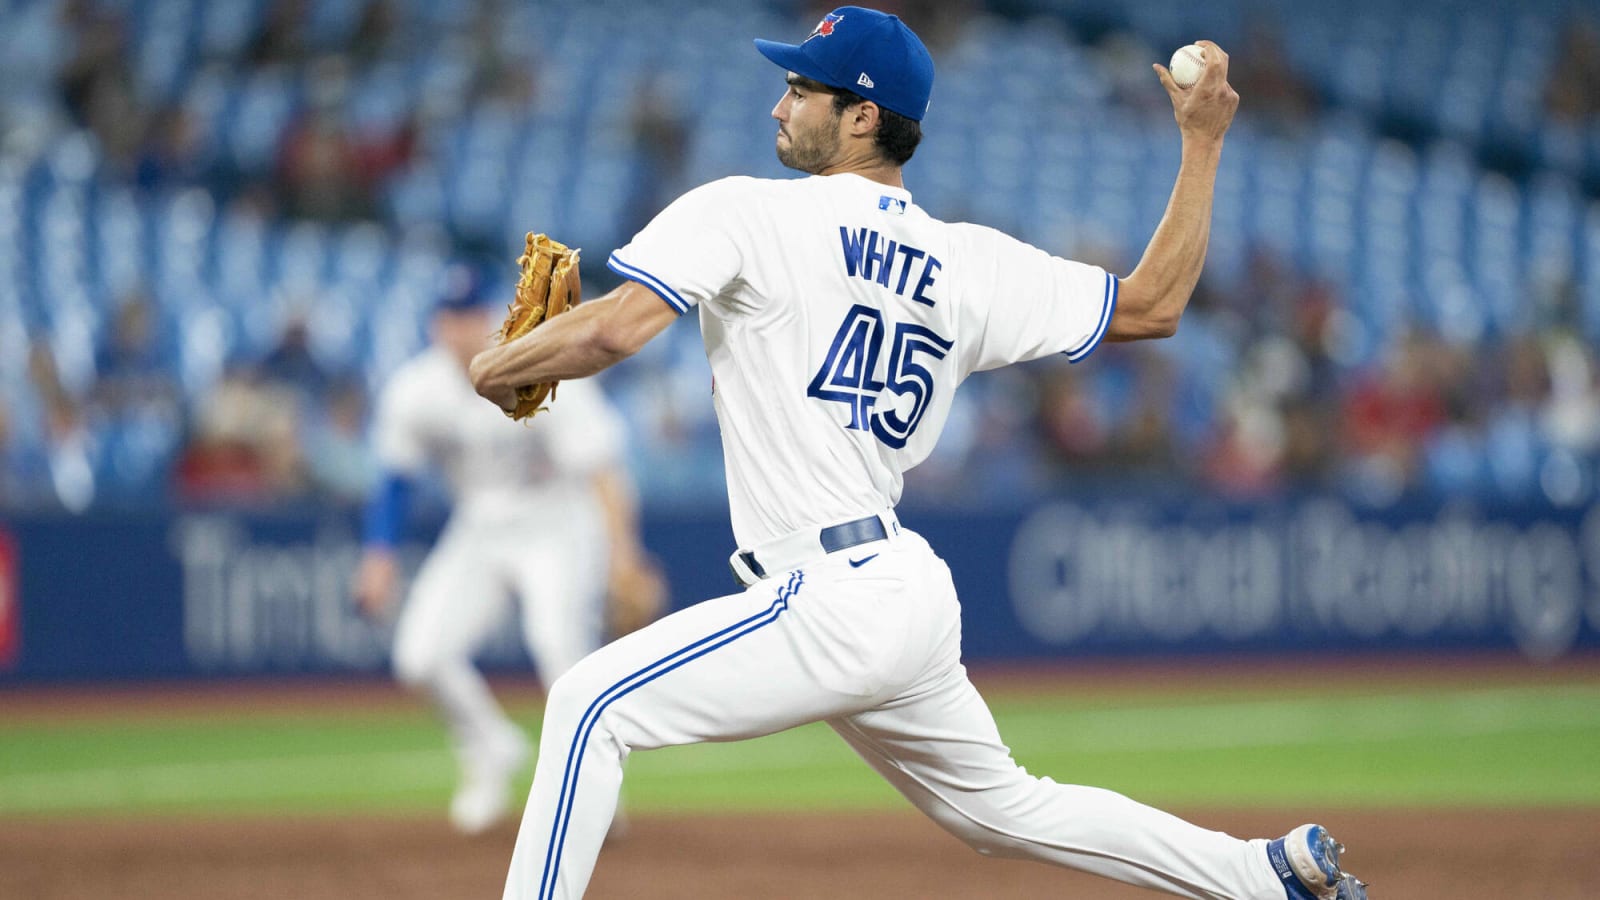 Blue Jays Rehab Recap: Mitch White struggled again, Adam Cimber pitched a clean inning, and more!